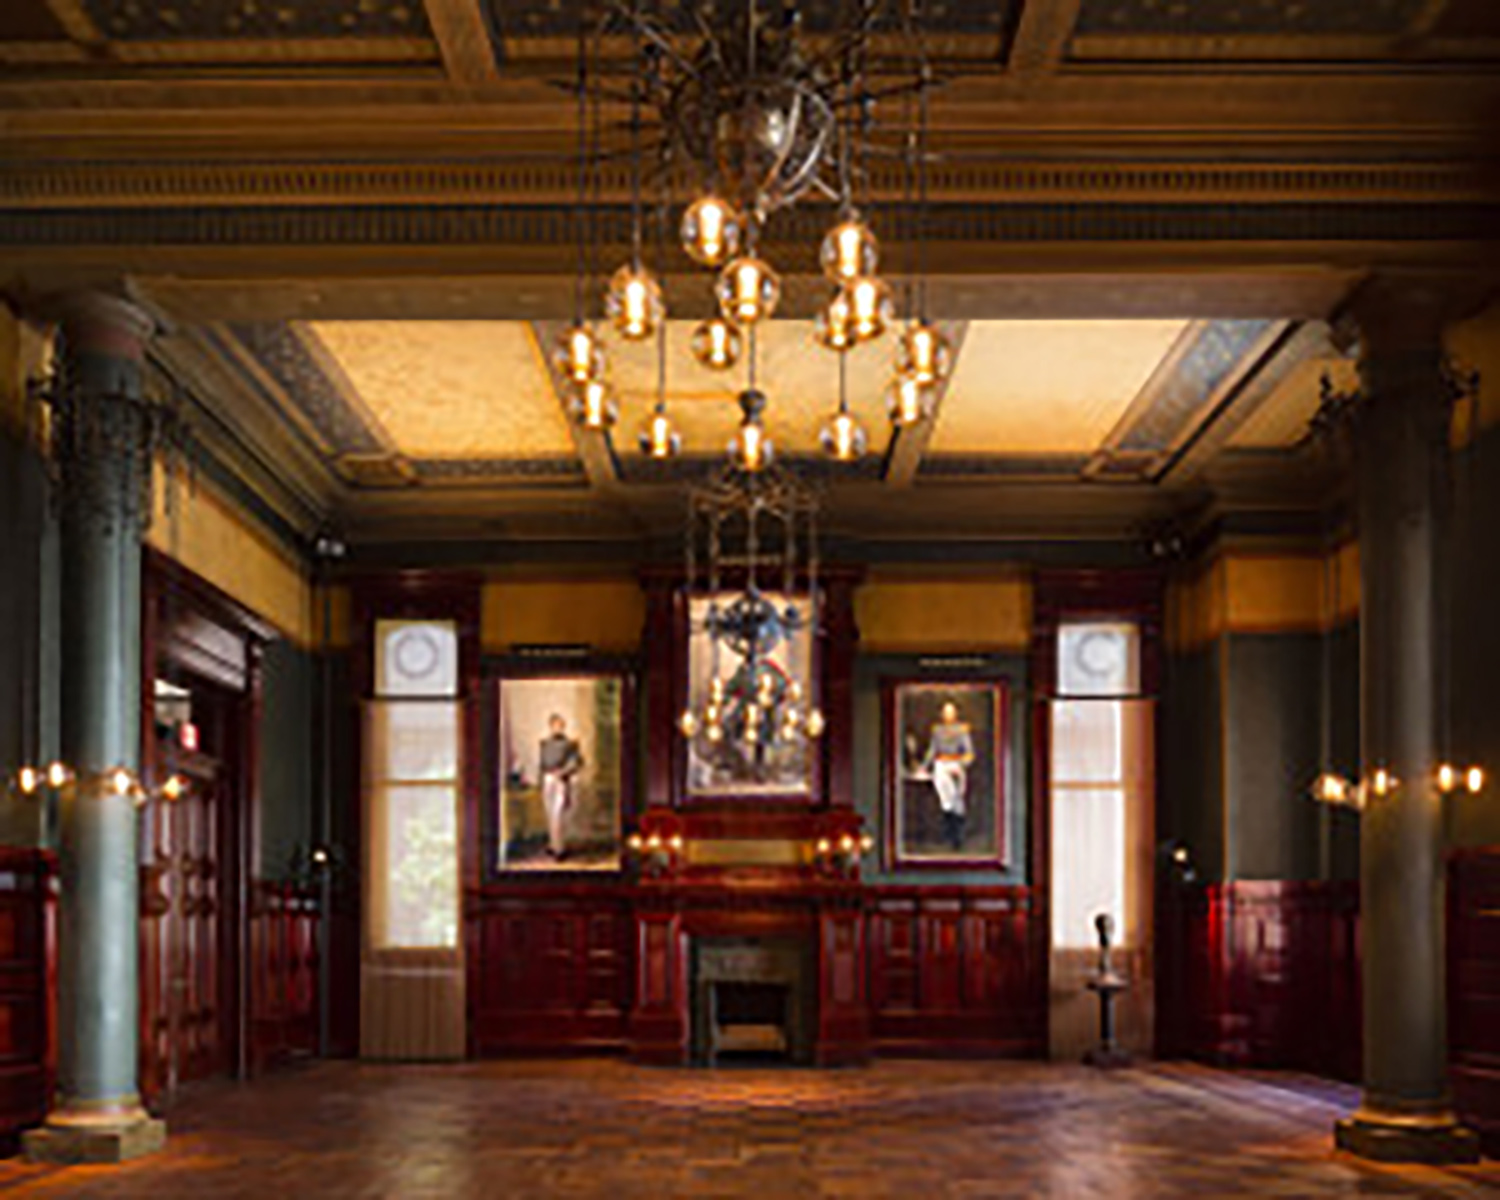 The Board of Officers Room at the Park Avenue Armory, winner of the 2014 Renaissance Award